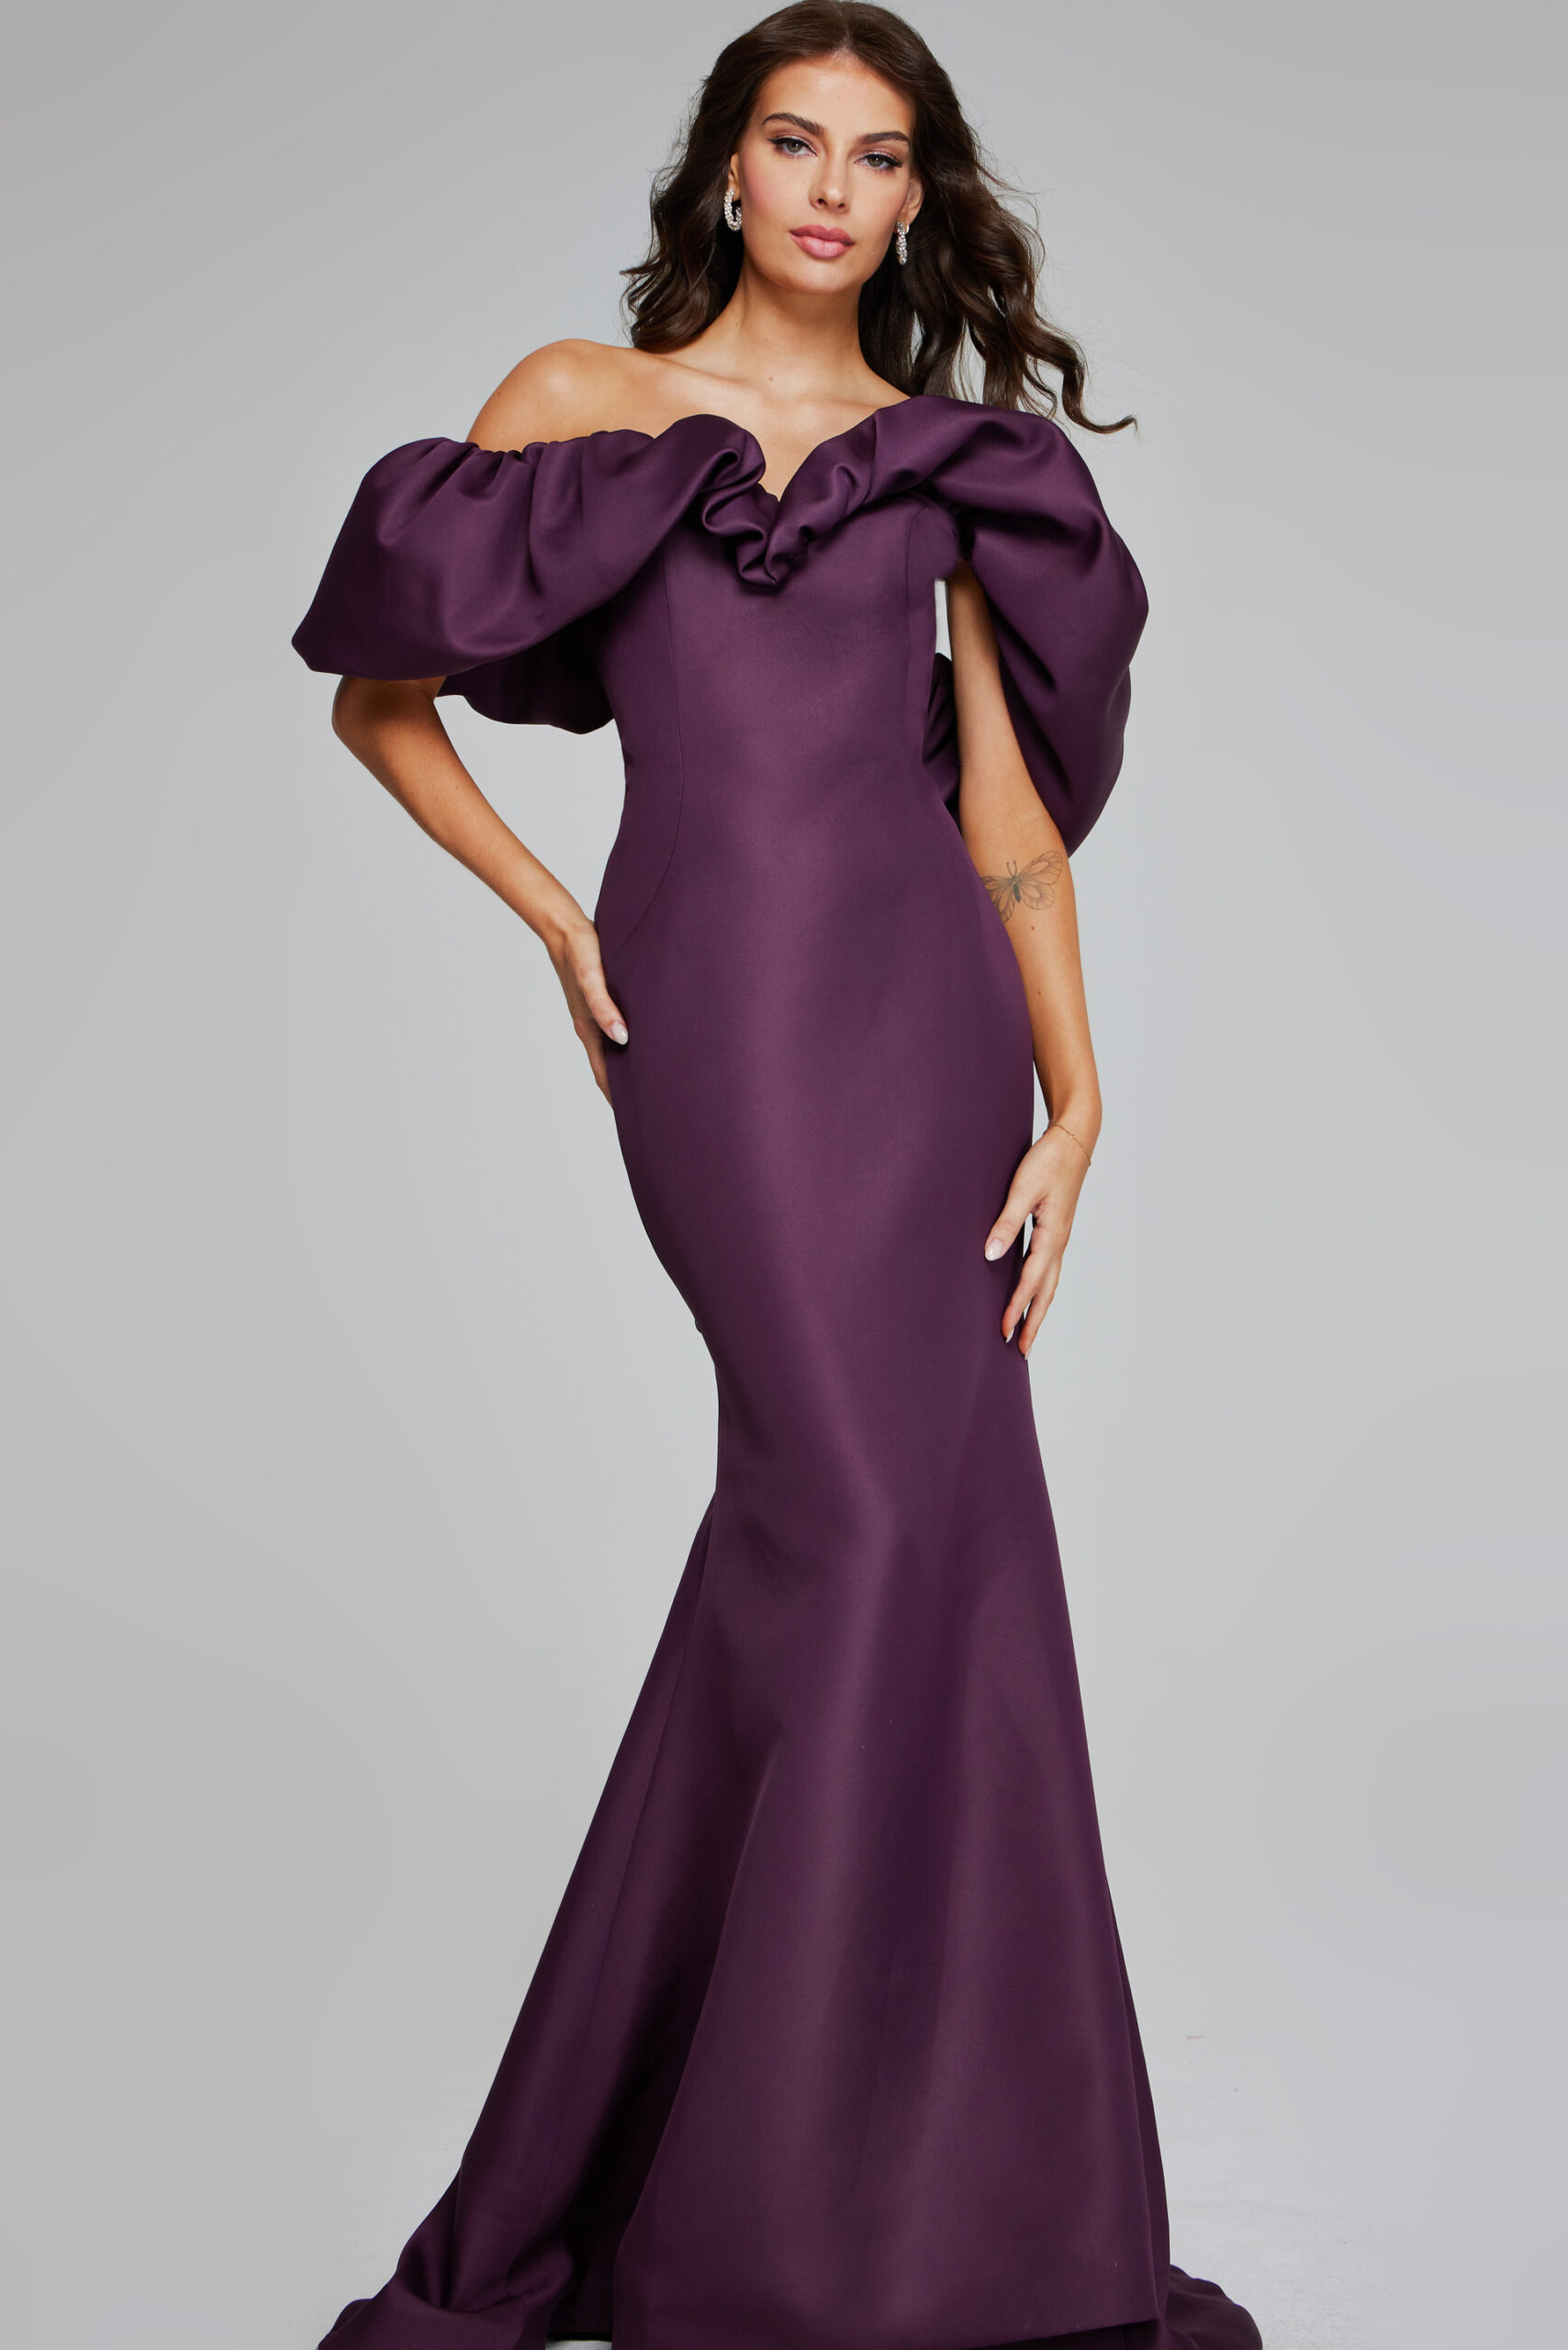 Model wearing Wine Off-Shoulder Gown with Dramatic Ruffled Sleeves 40596